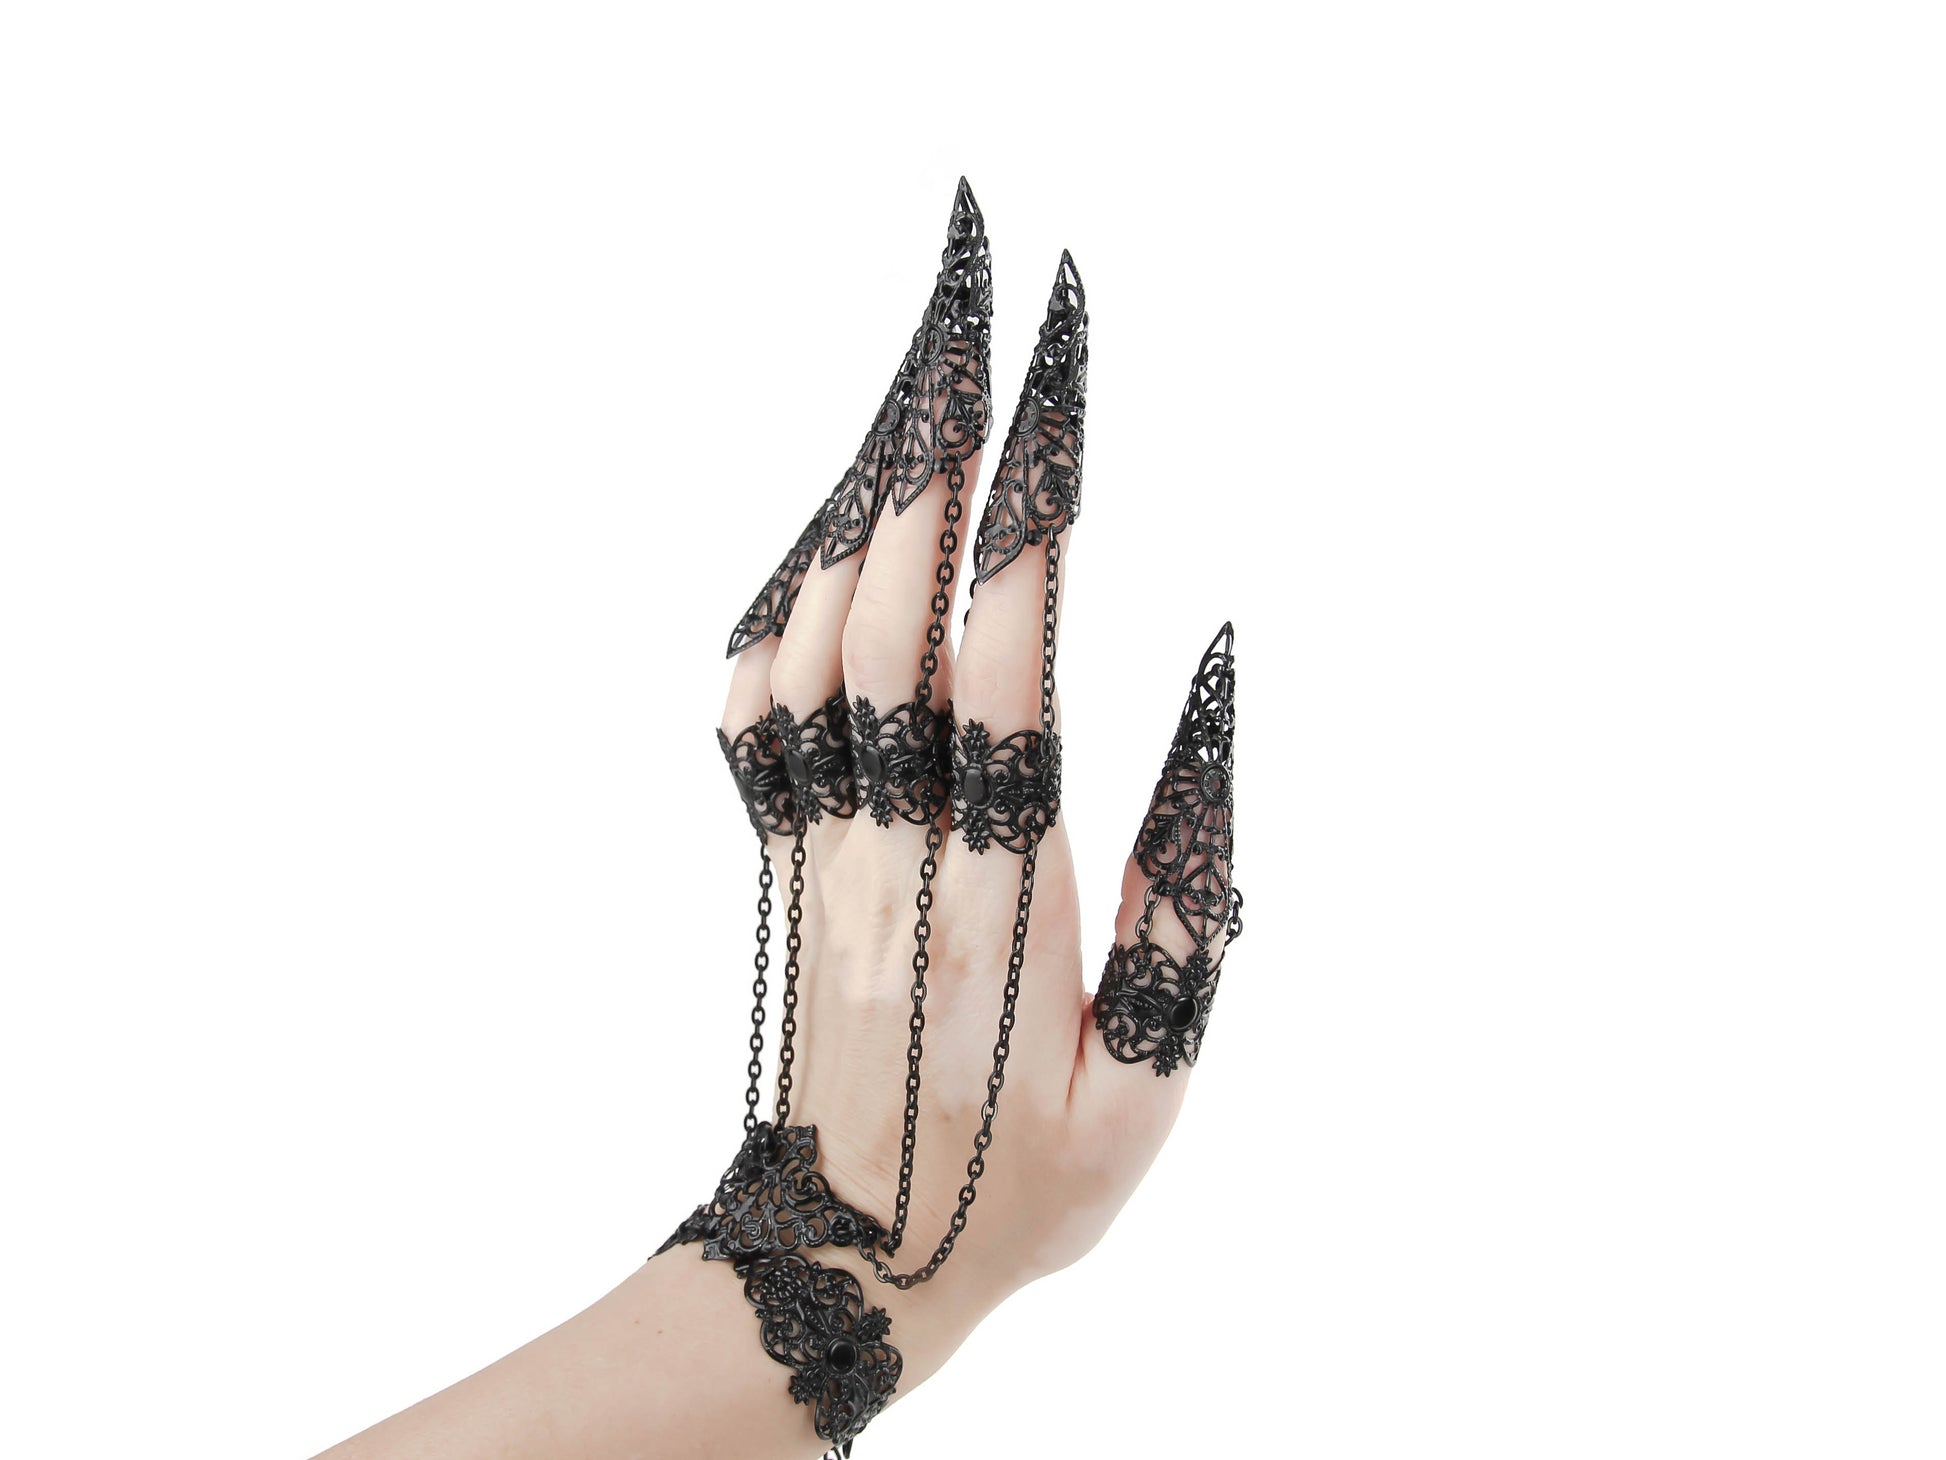 A hand adorned with black claw rings connected by delicate chains to the bracelt part, showcasing a gothic jewelry style with intricate filigree, perfect for a bold gothic or avant-garde fashion statement.